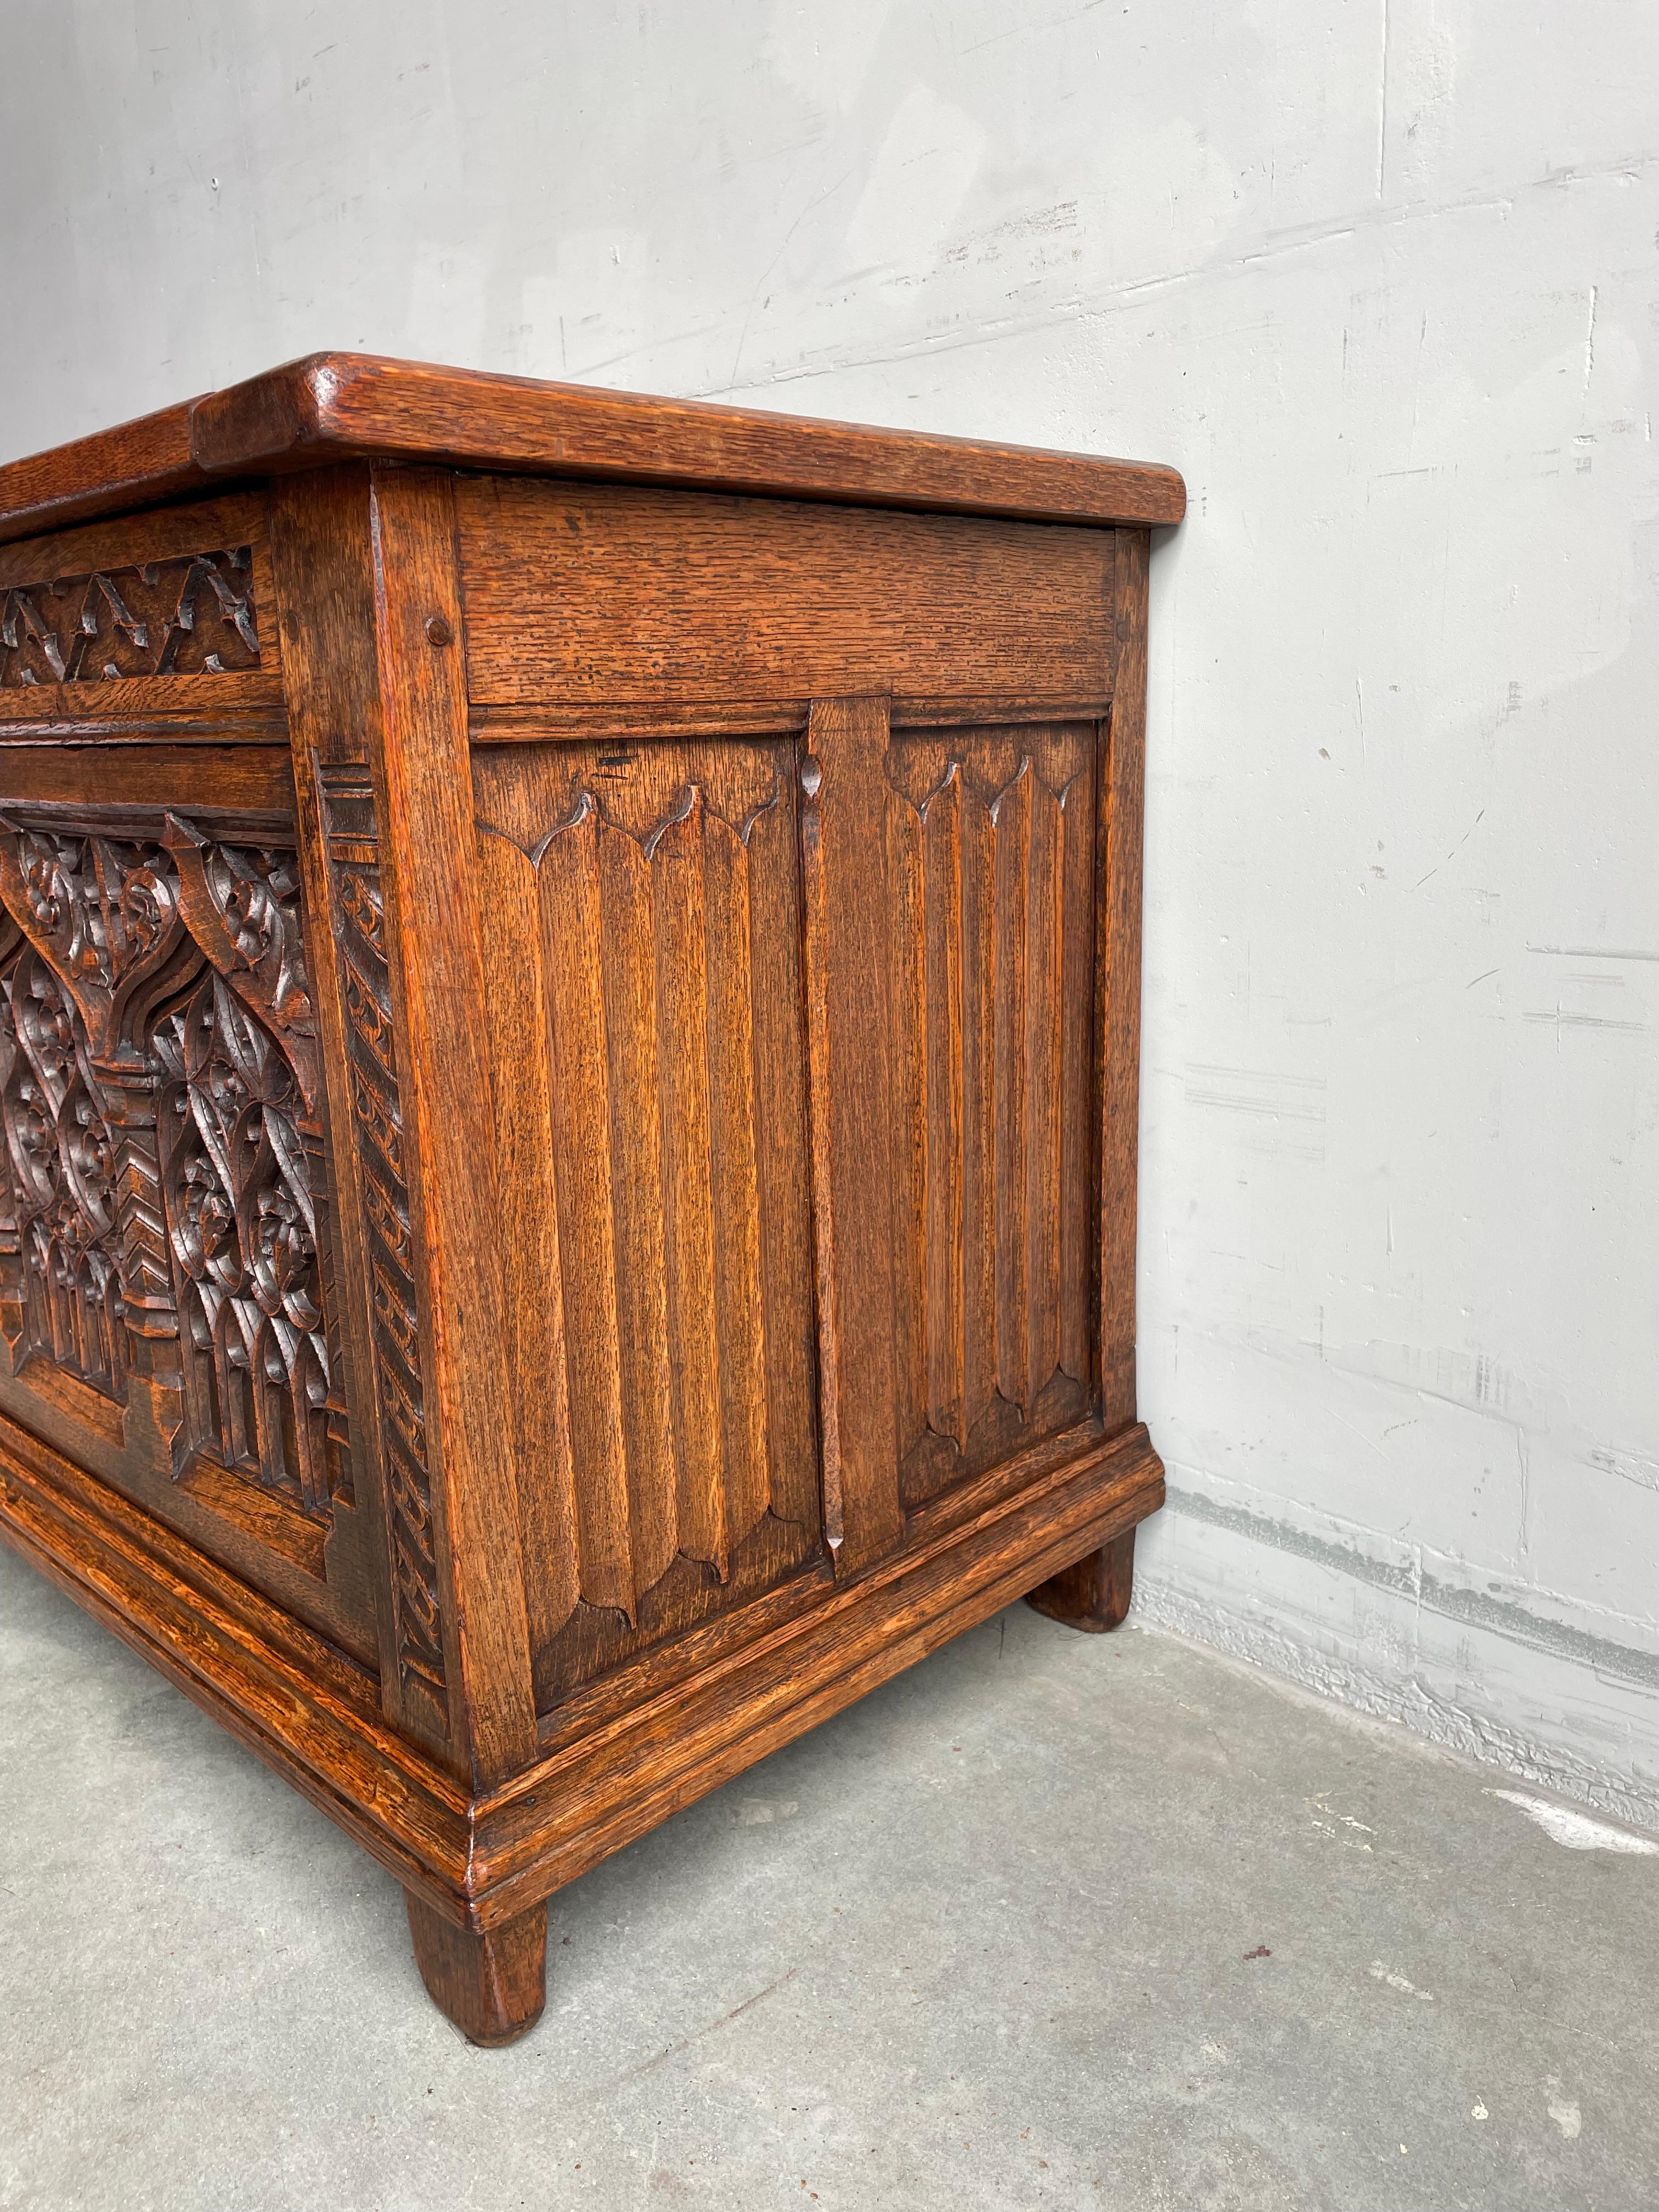 19th Century Rare Size Antique Gothic Revival Hand Carved Oak Chest / Trunk with Warm Patina